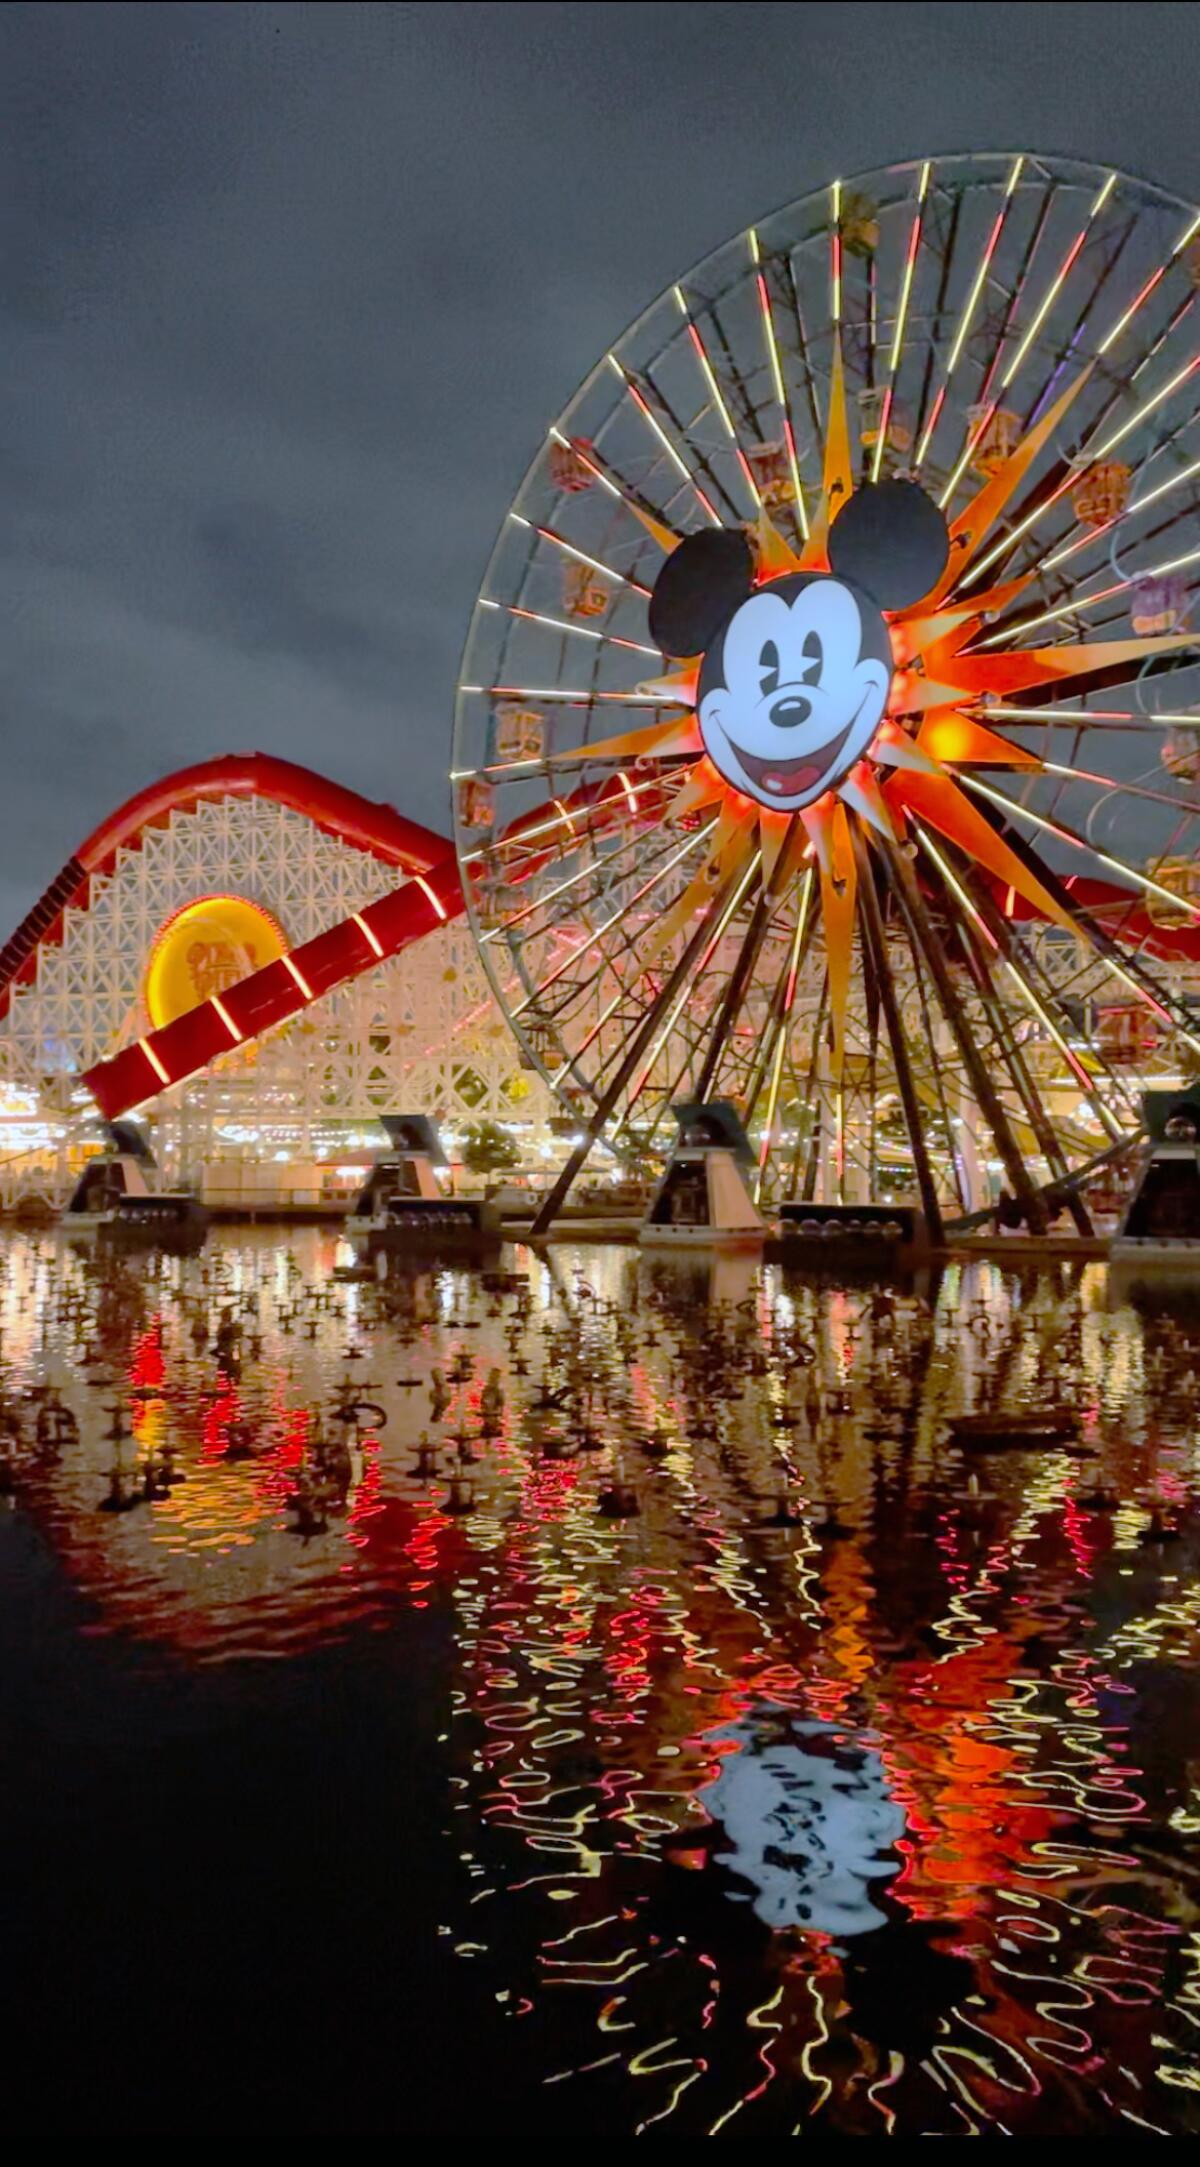 The Pixar Pal-A-Round, formerly known as Mickey's Fun Wheel at Disney California Adventure.